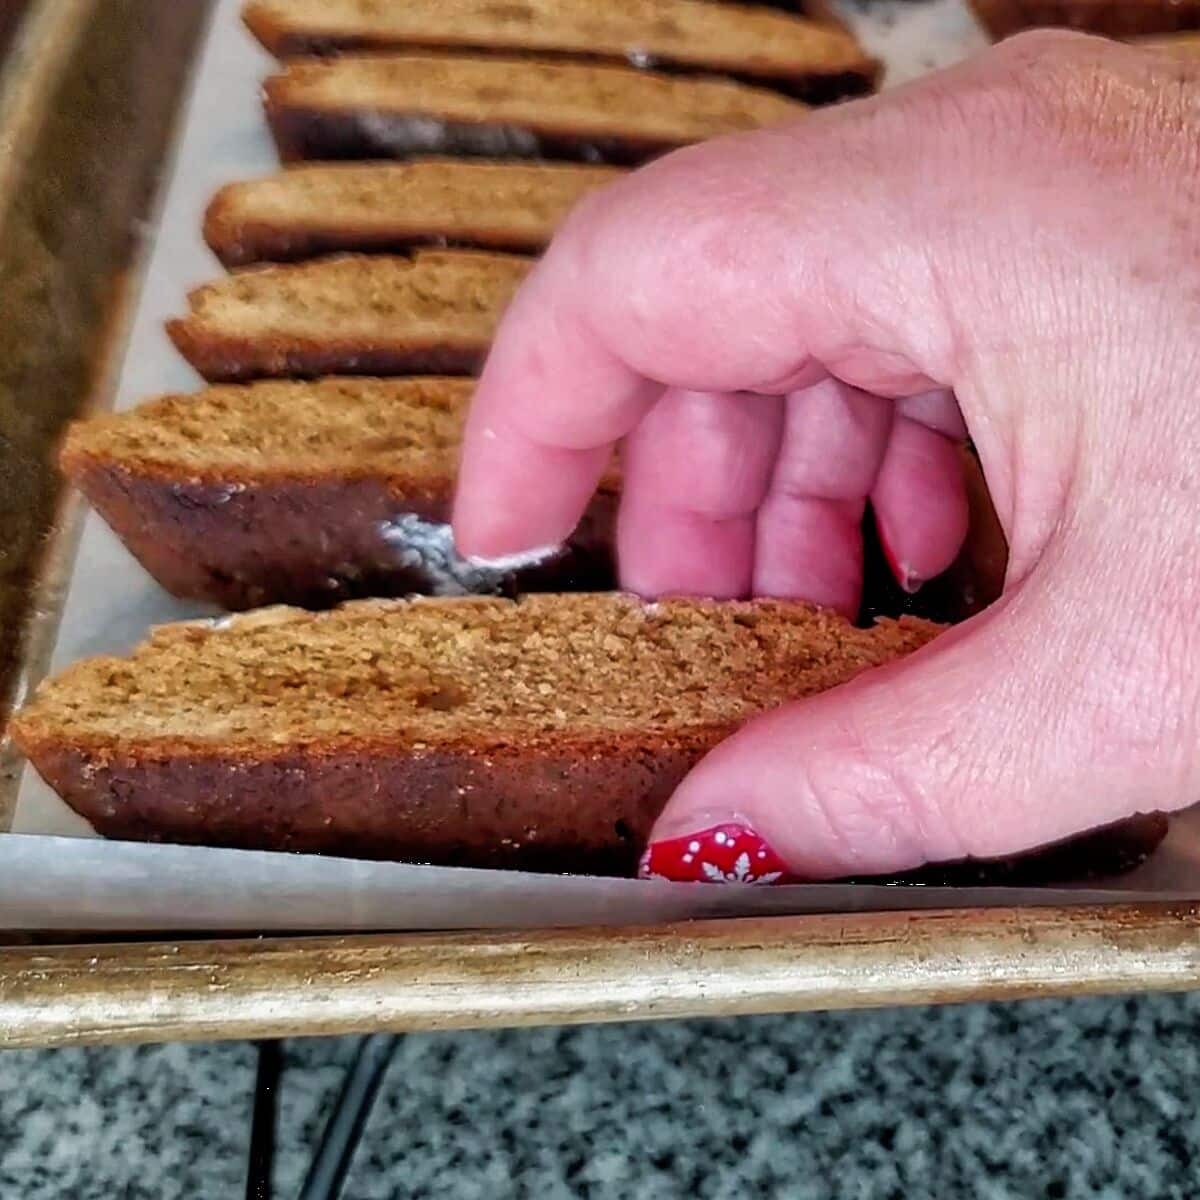 placing cut biscotti on prepared baking sheet for baking a second time.